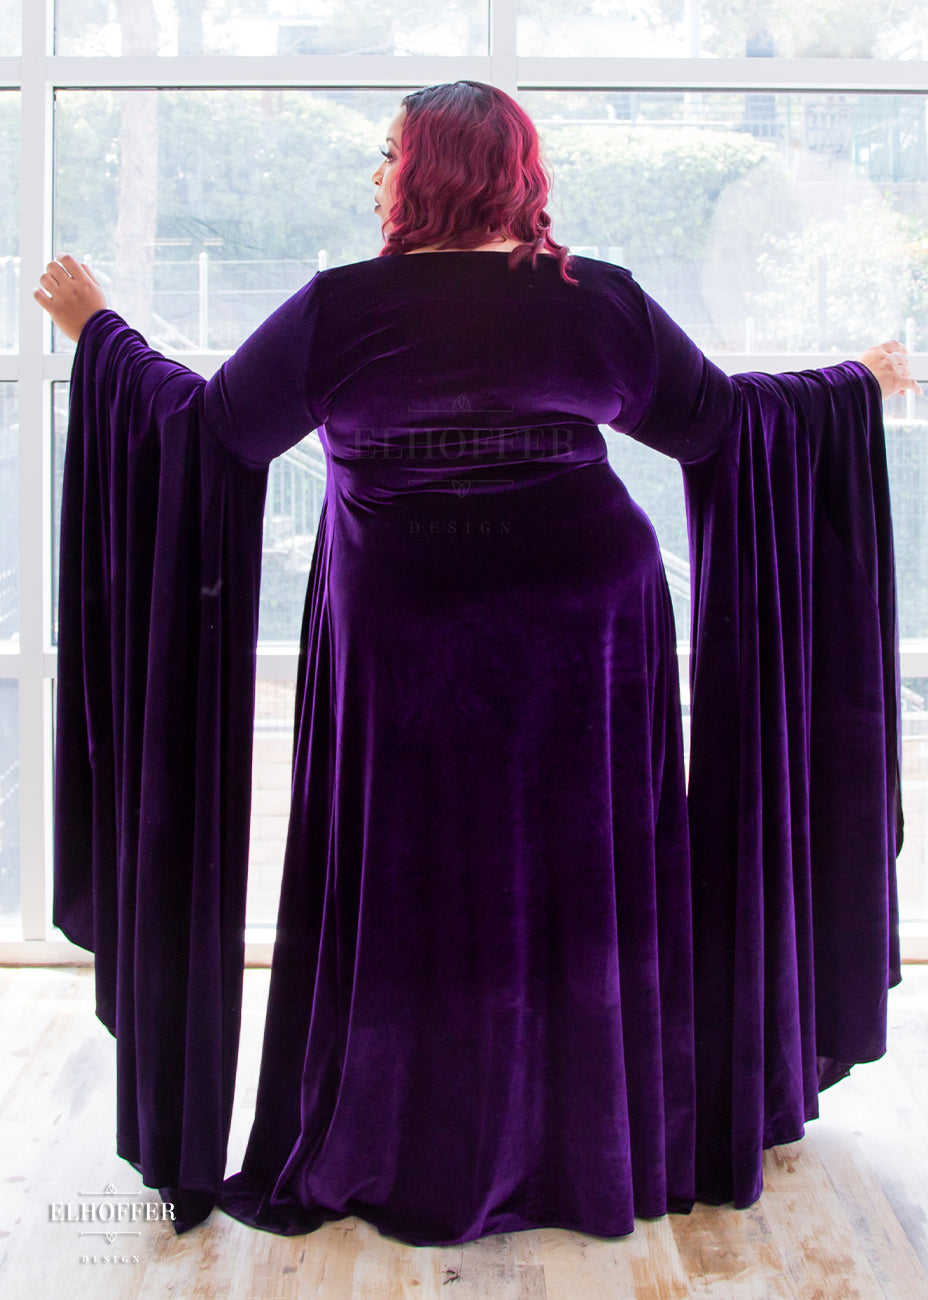 Dawn models the back of the full length purple velvet dress. The sleeves are fitted to the elbow and are full and the ends fall to the floor.